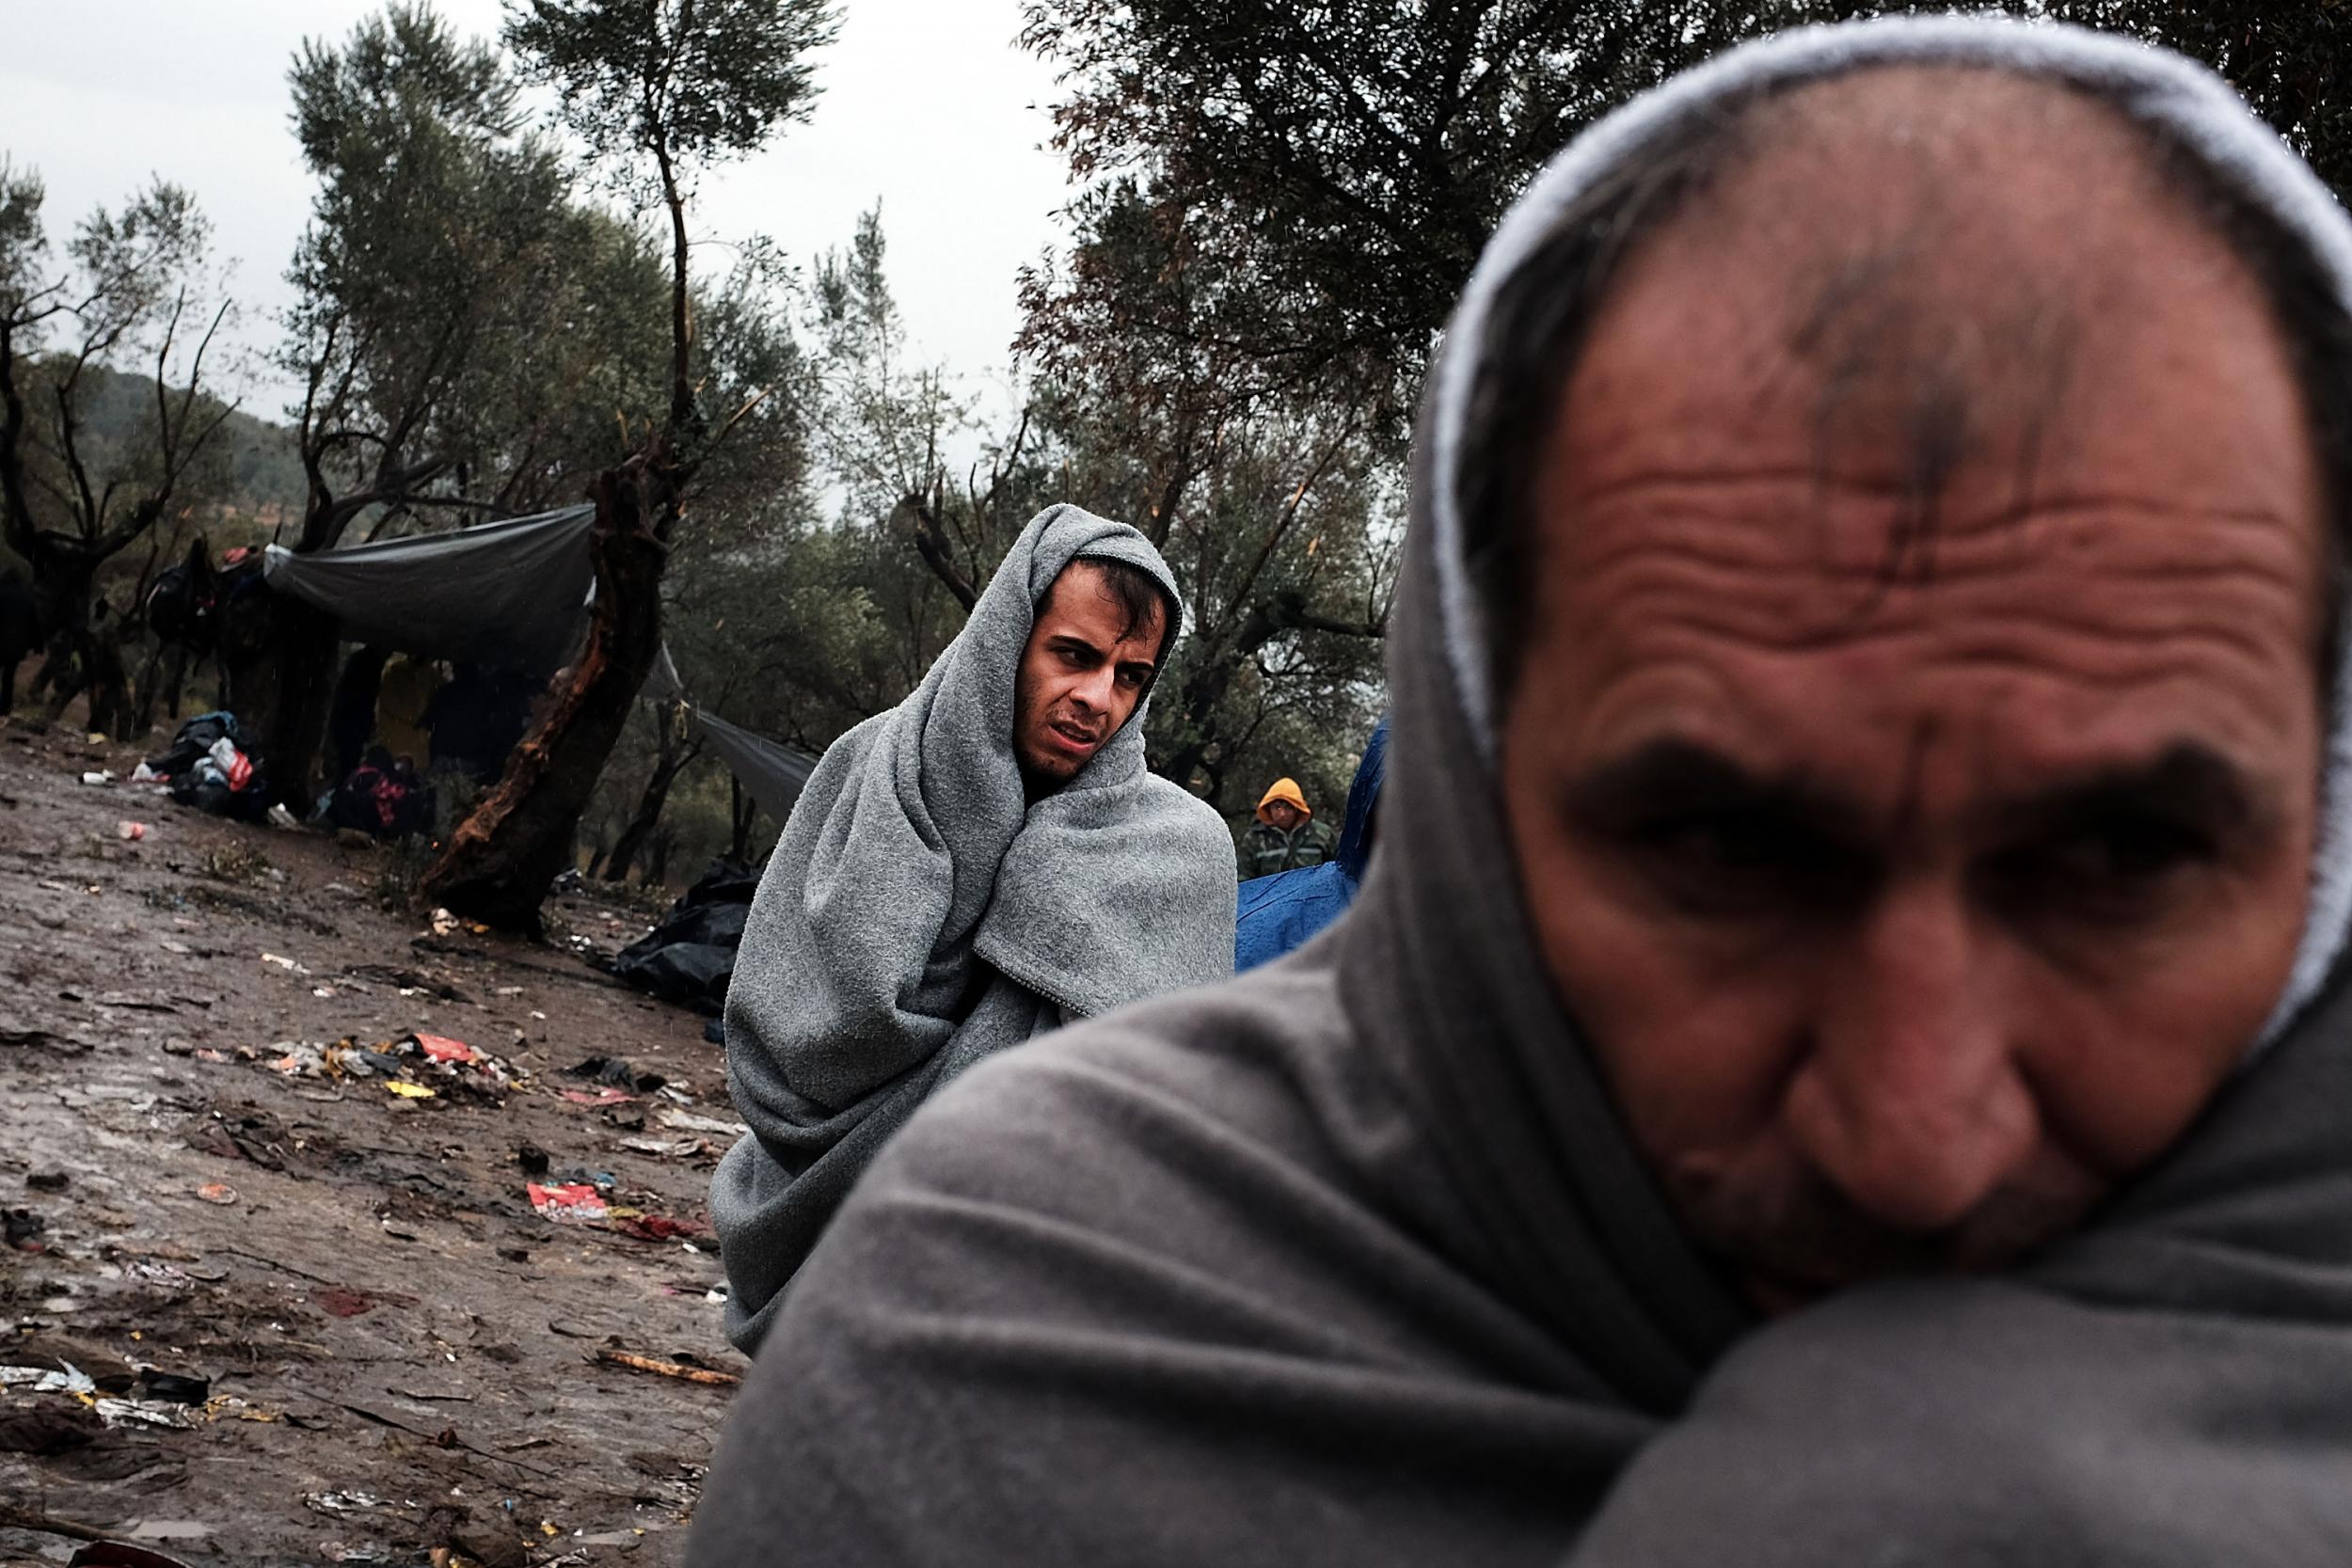 Many Syrian refugees have ended up in overwhelmed camps on European islands like Greece's Lesbos